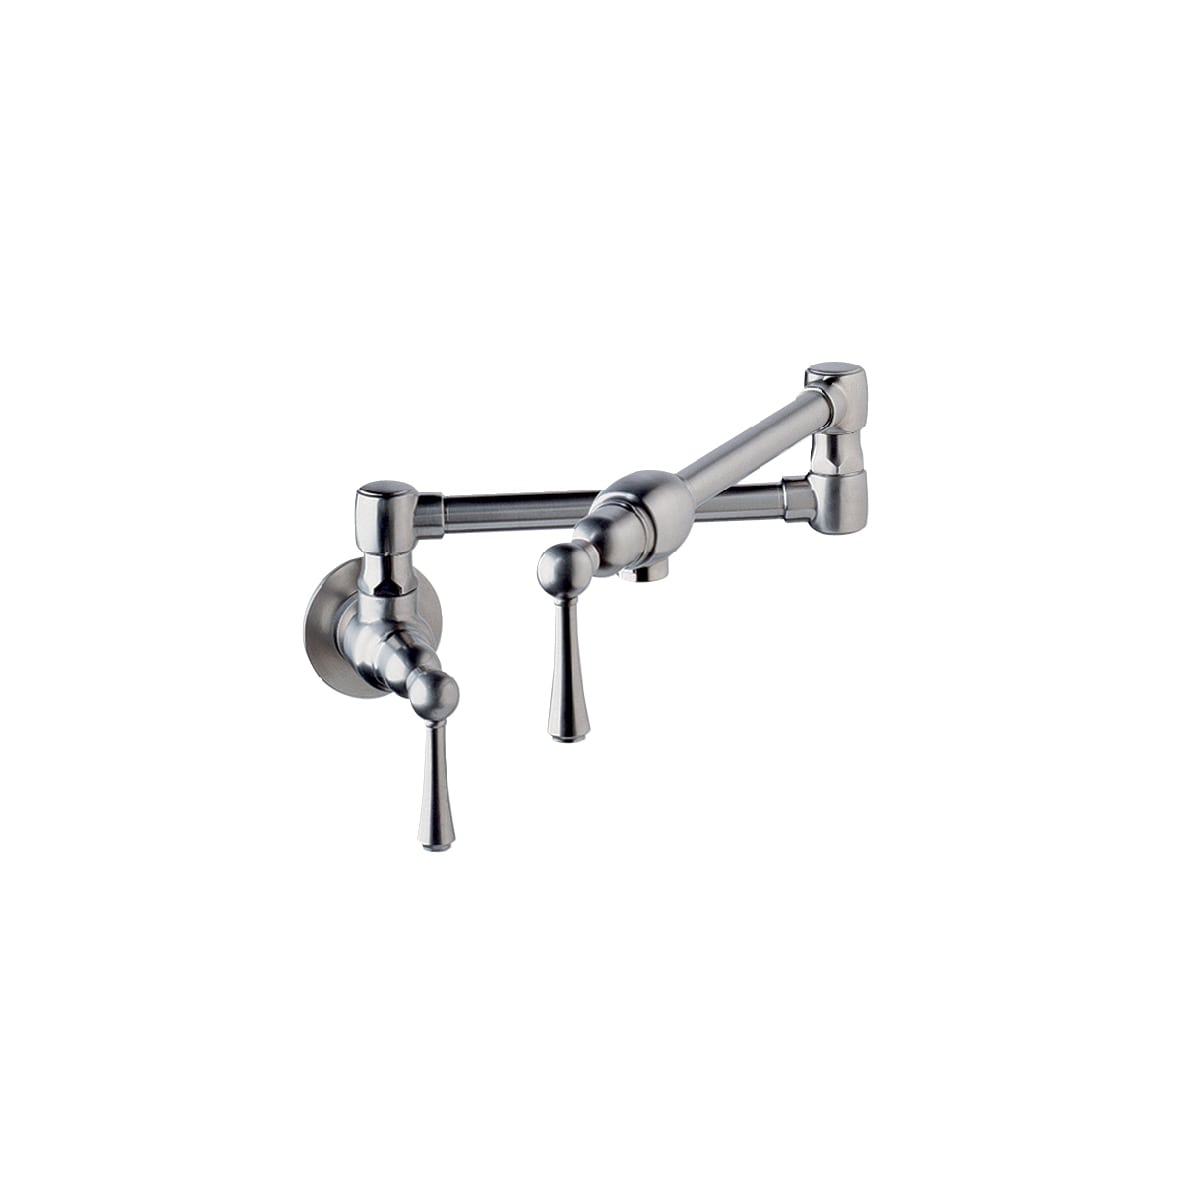 Grohe 31041sd0 Stainless Steel Wall Mounted Pot Filler Faucet With